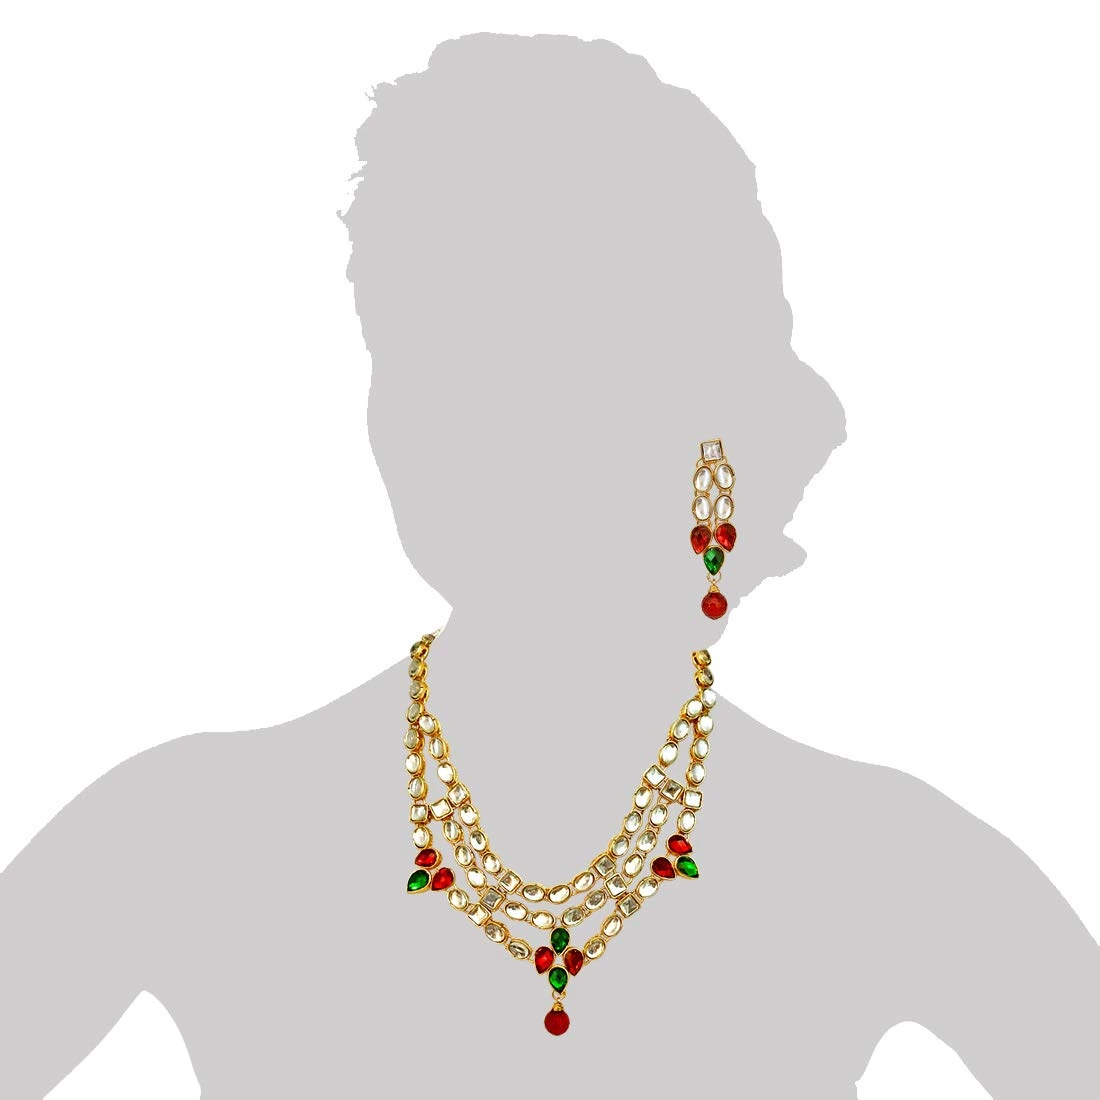 Traditional Red Green White Polki Necklace with Earrings